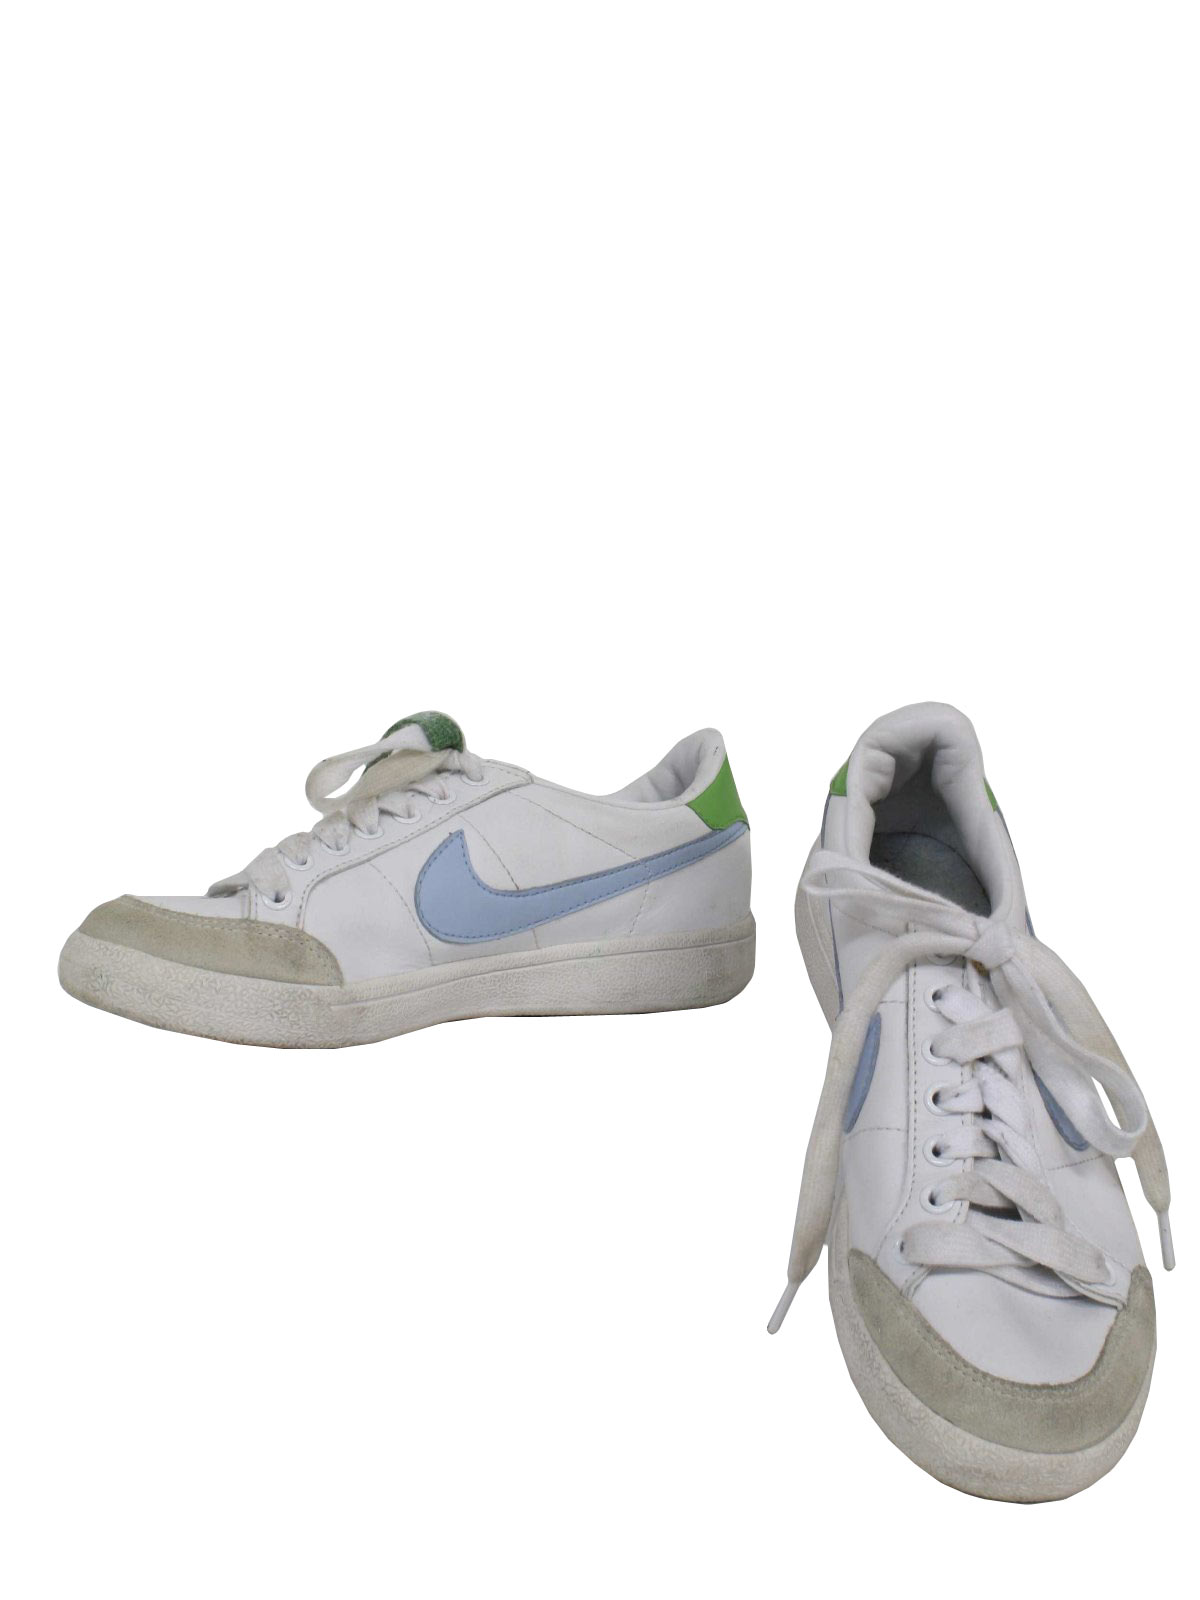 old school white nike shoes